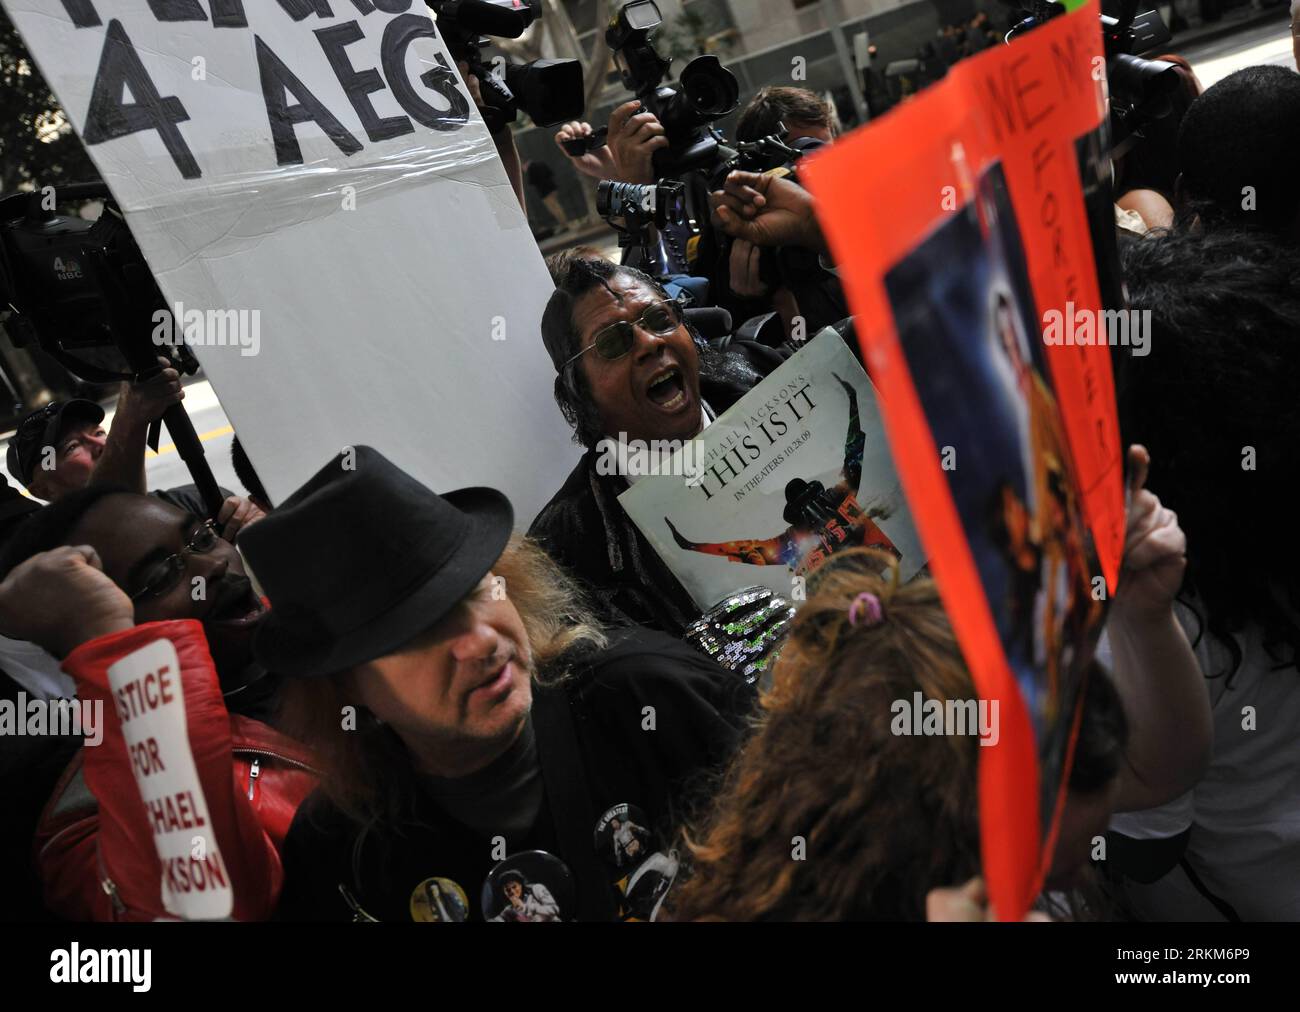 Bildnummer: 56533011  Datum: 29.11.2011  Copyright: imago/Xinhua (111129) -- LOS ANGELES, Nov. 29, 2011 (Xinhua) -- Fans of Michael Jackson celebrate outside the court after the sentence in Los Angeles, the United States, Nov. 29, 2011. A Los Angeles judge Tuesday sentenced Conrad Murray, Michael Jackson s personal physician, to a maximum of 4 years of imprisonment on involuntary manslaughter charge stemming from the death of the pop star. (Xinhua/Yang Lei) US-LA-MICHAEL JACKSON-PERSONAL PHYSICIAN-SENTENCE PUBLICATIONxNOTxINxCHN People Musik Gericht Gerichtsverhandlung Fahrlässige Tötung Urtei Stock Photo